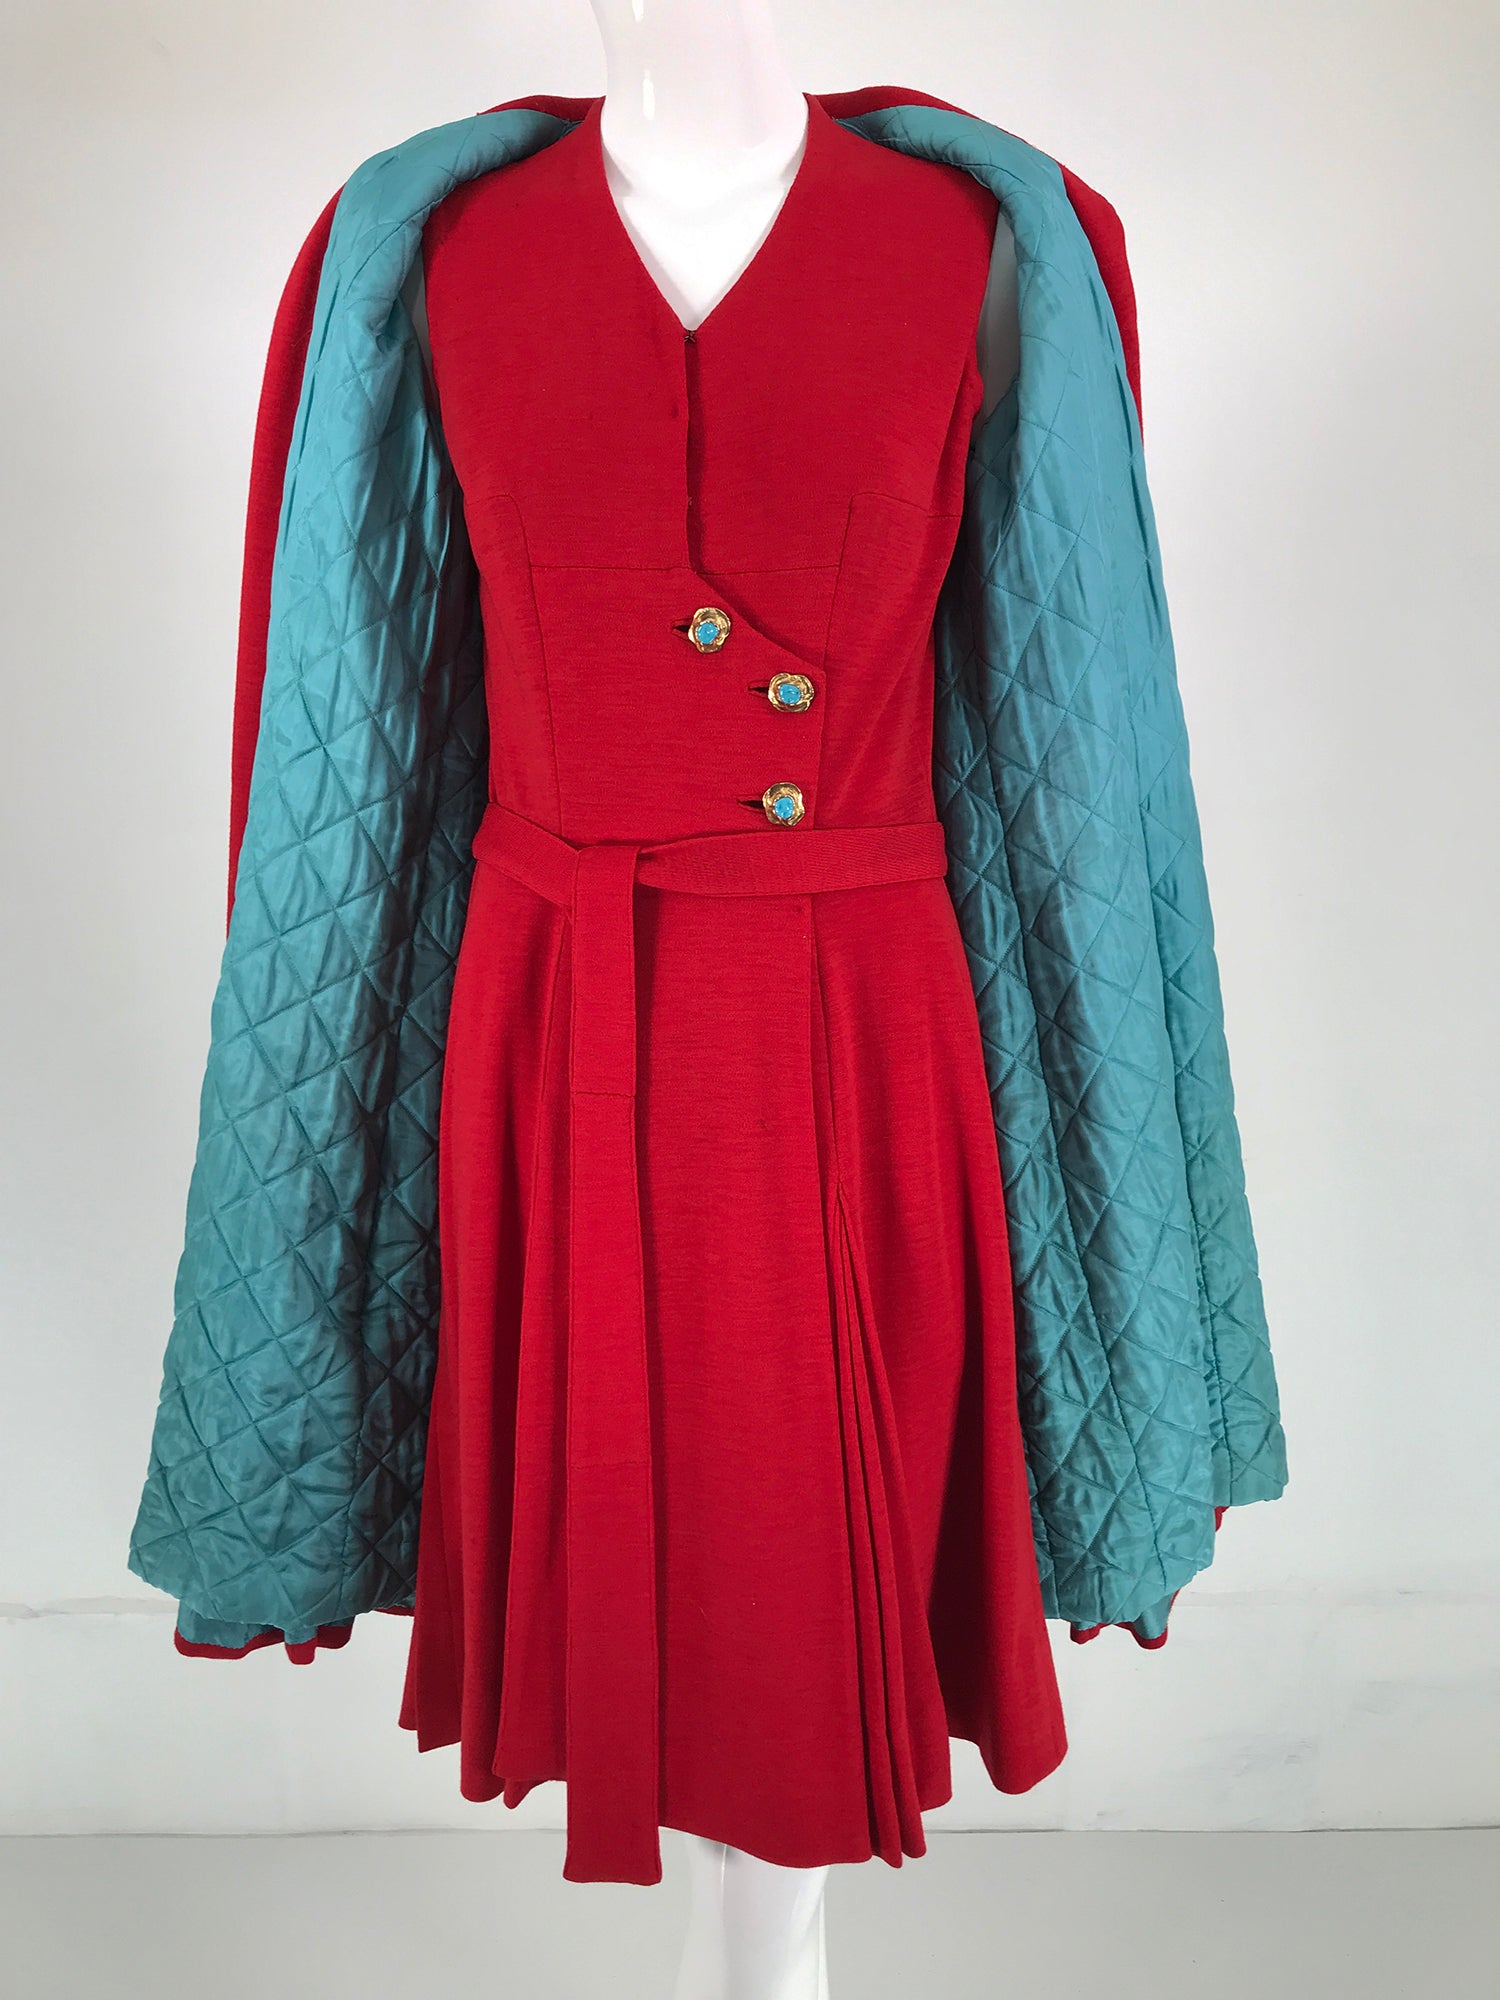 Coco Chanel Red Haute Couture 1950s 2 pc Wool Jersey Jewel Button